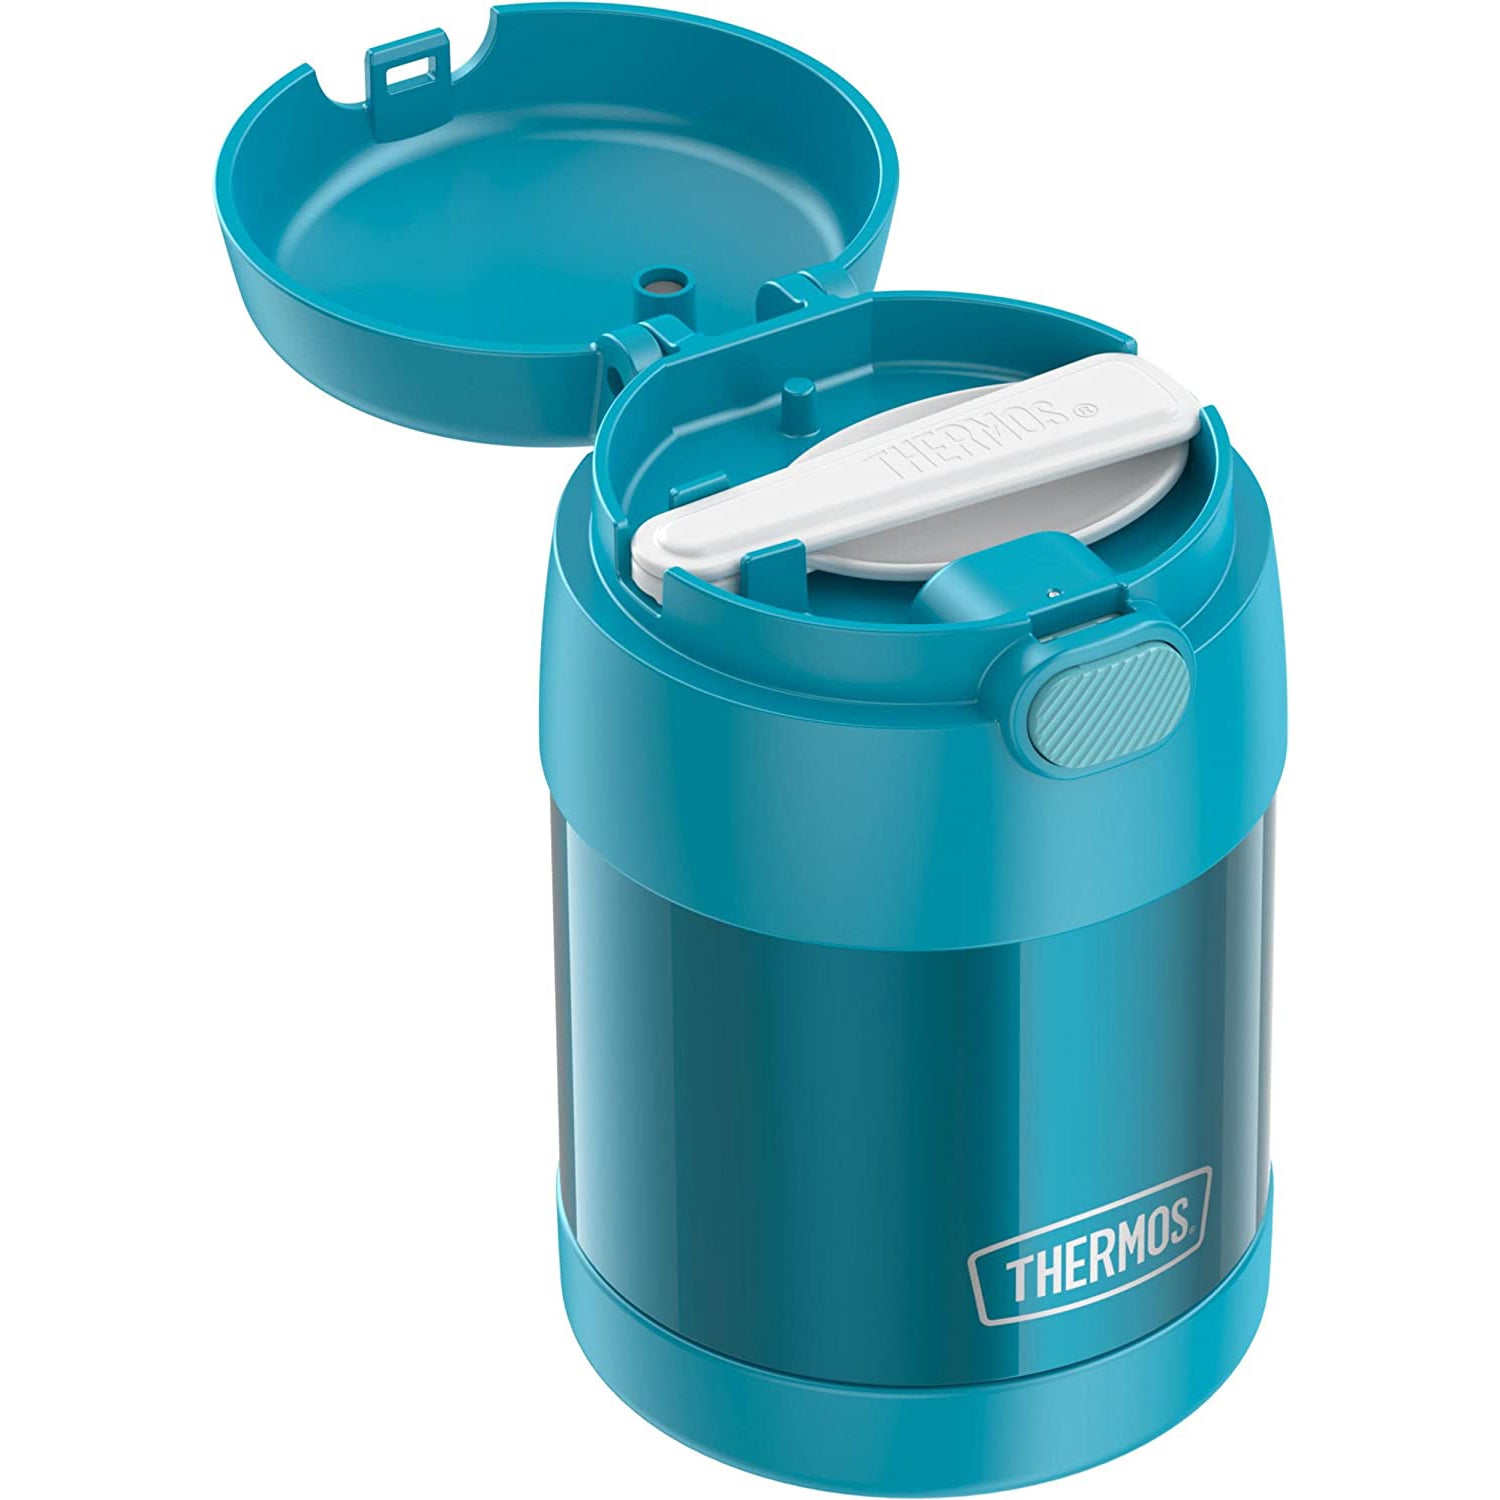 THERMOS FUNTAINER 10 Ounce Stainless Steel Vacuum Insulated Kids Food Jar, Teal